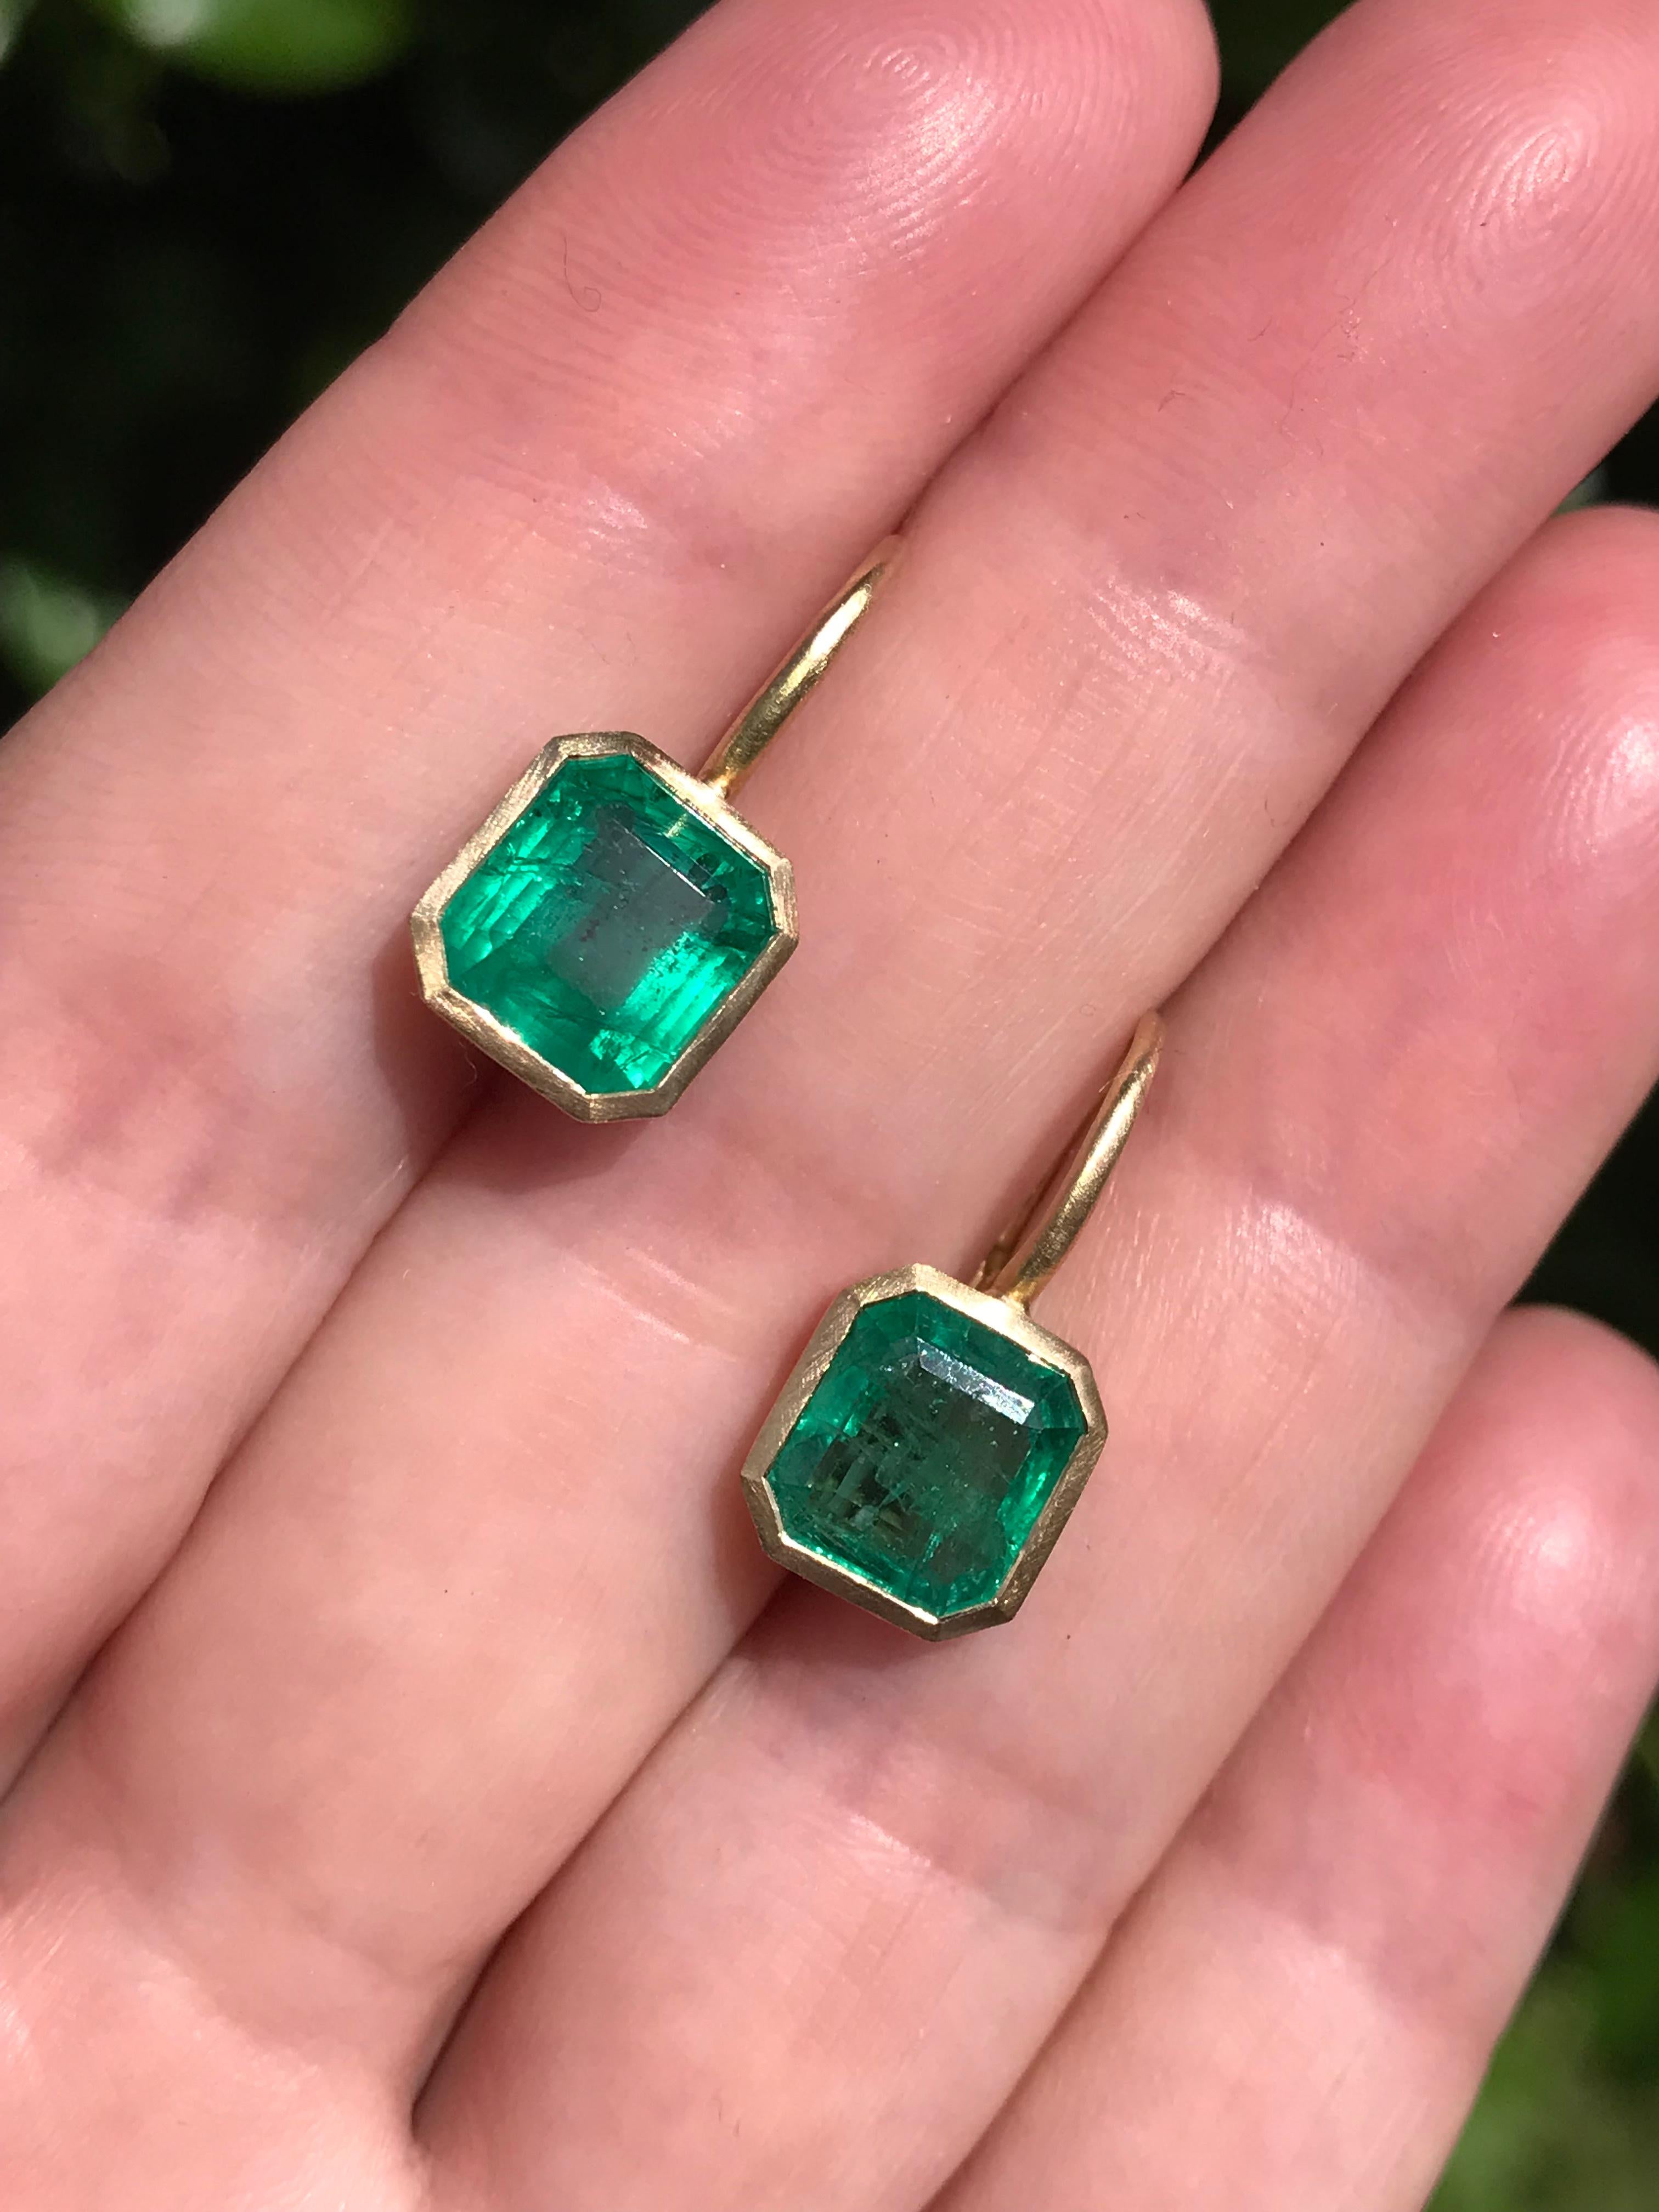 Dalben design  18k yellow gold matte finishing earrings with two bezel-set emerald faceted cut  Zambian emerald weight 4,42 carats .
They are not a perfect pair ,  
Bezel stone dimensions :
9,6 x 9 mm   9,7 x 9,1 mm
height with leverback 19,2 mm
The